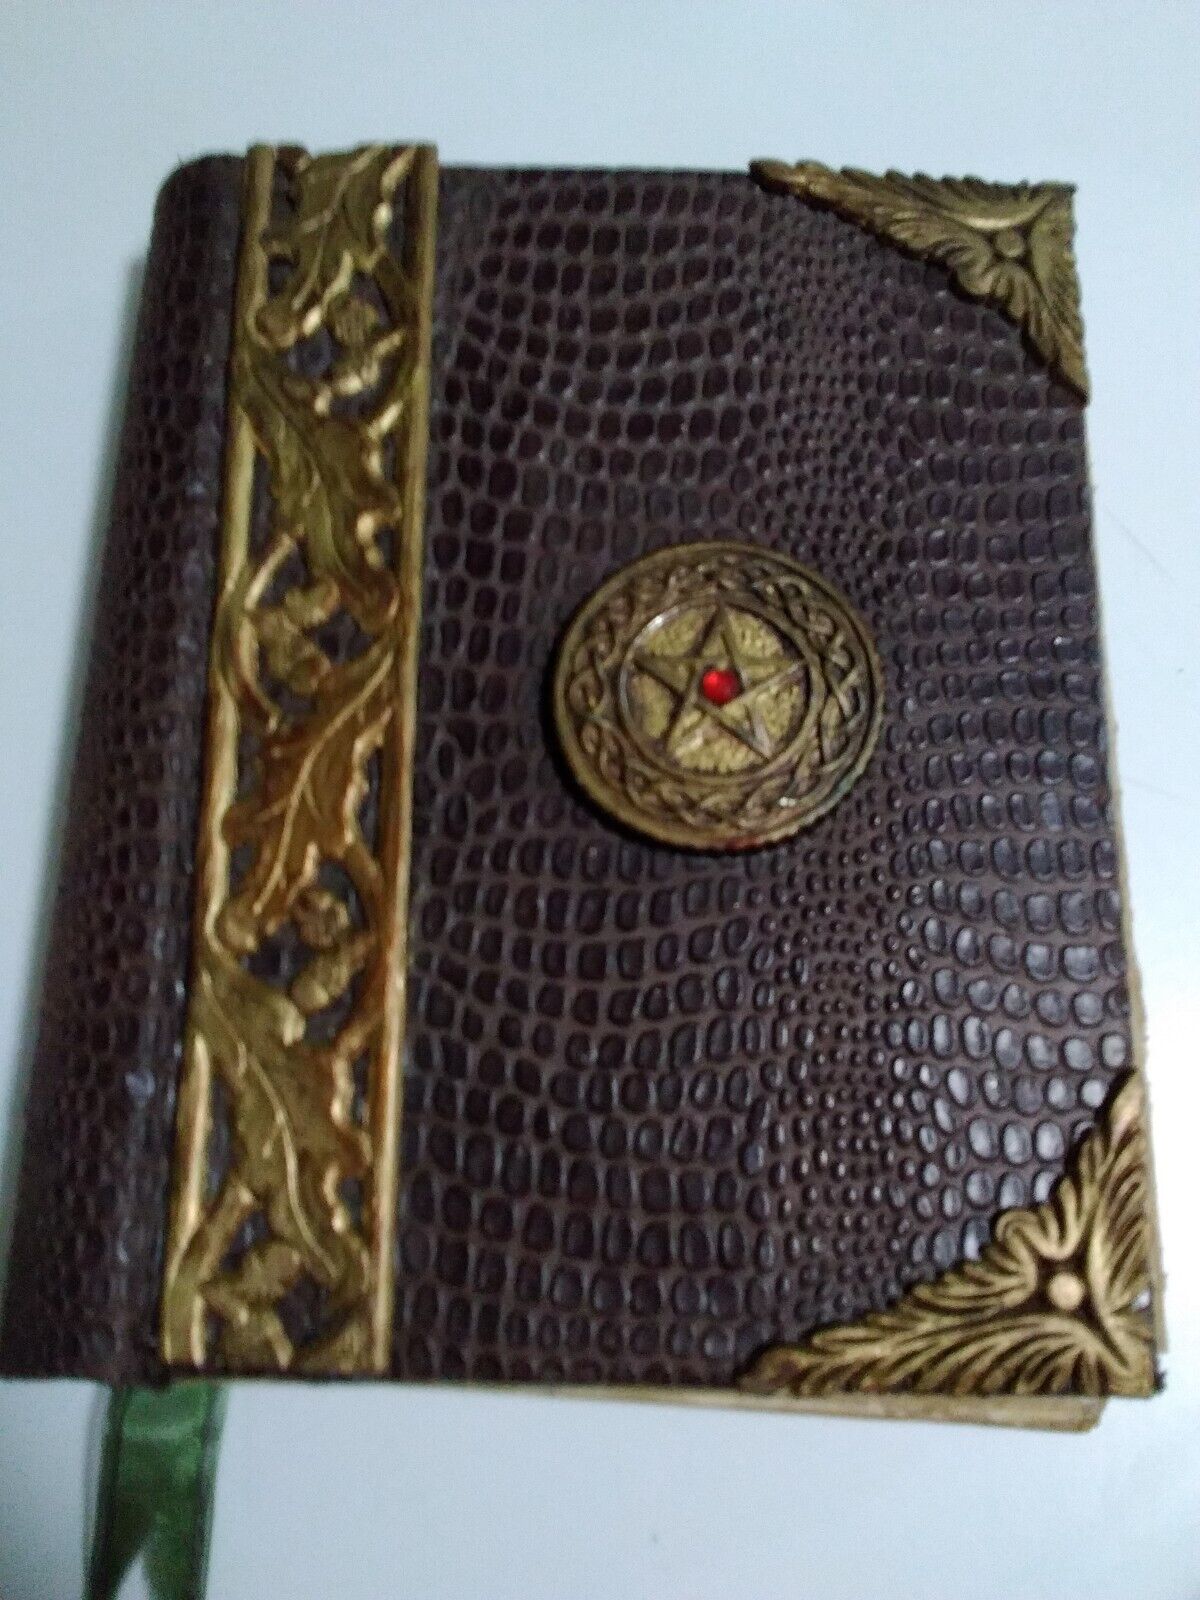 BOOK OF SHADOWS WITH SPELLS HAS CERTIFICATE OF AUTHENTICITY HANDMADE